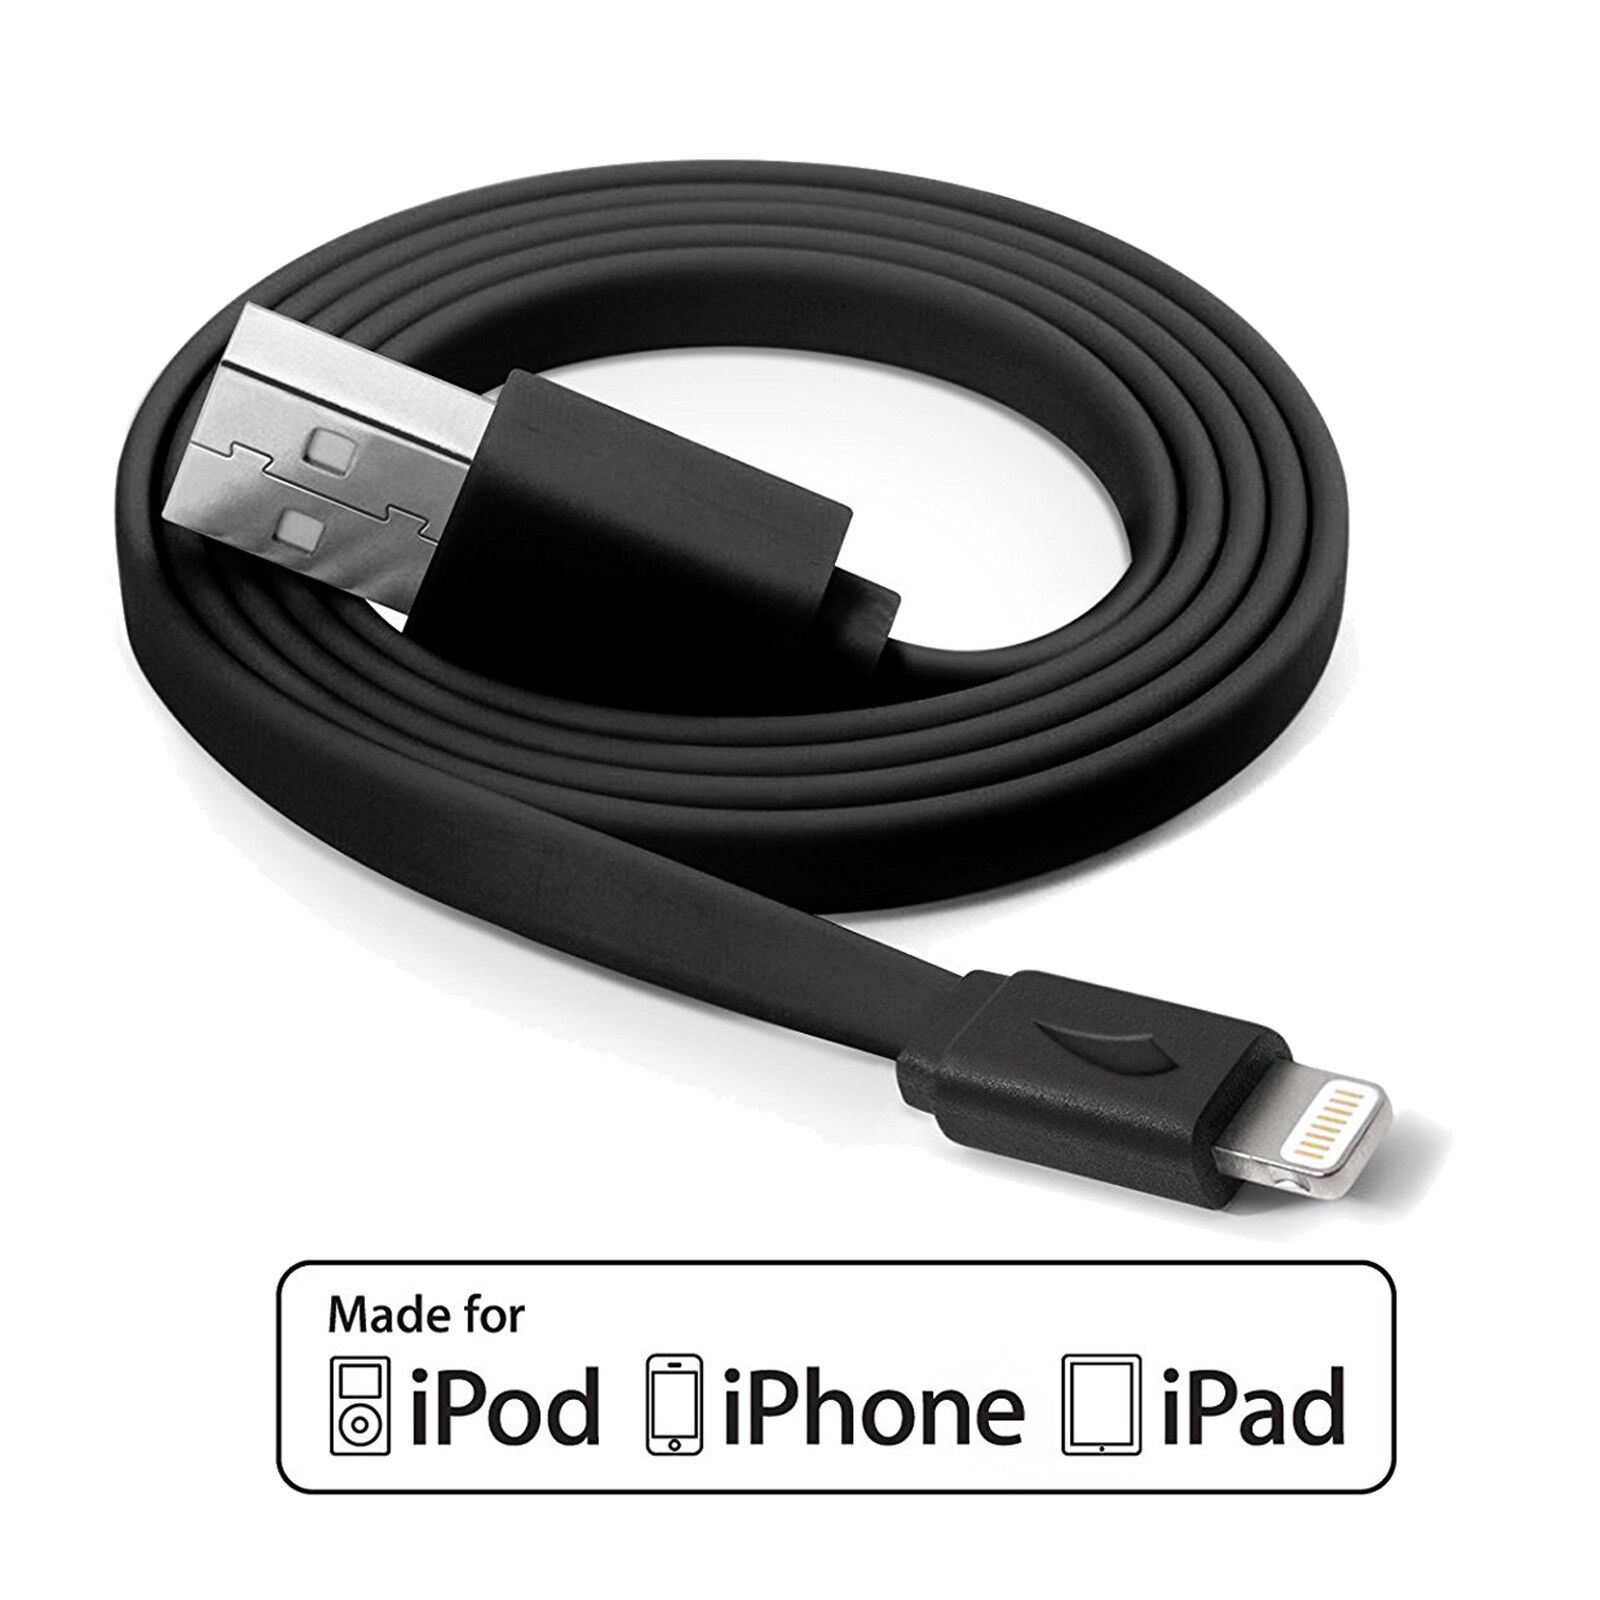 MFi Certified Apple iPad Charger, (Durability Rated 4,000 Bends) Lot